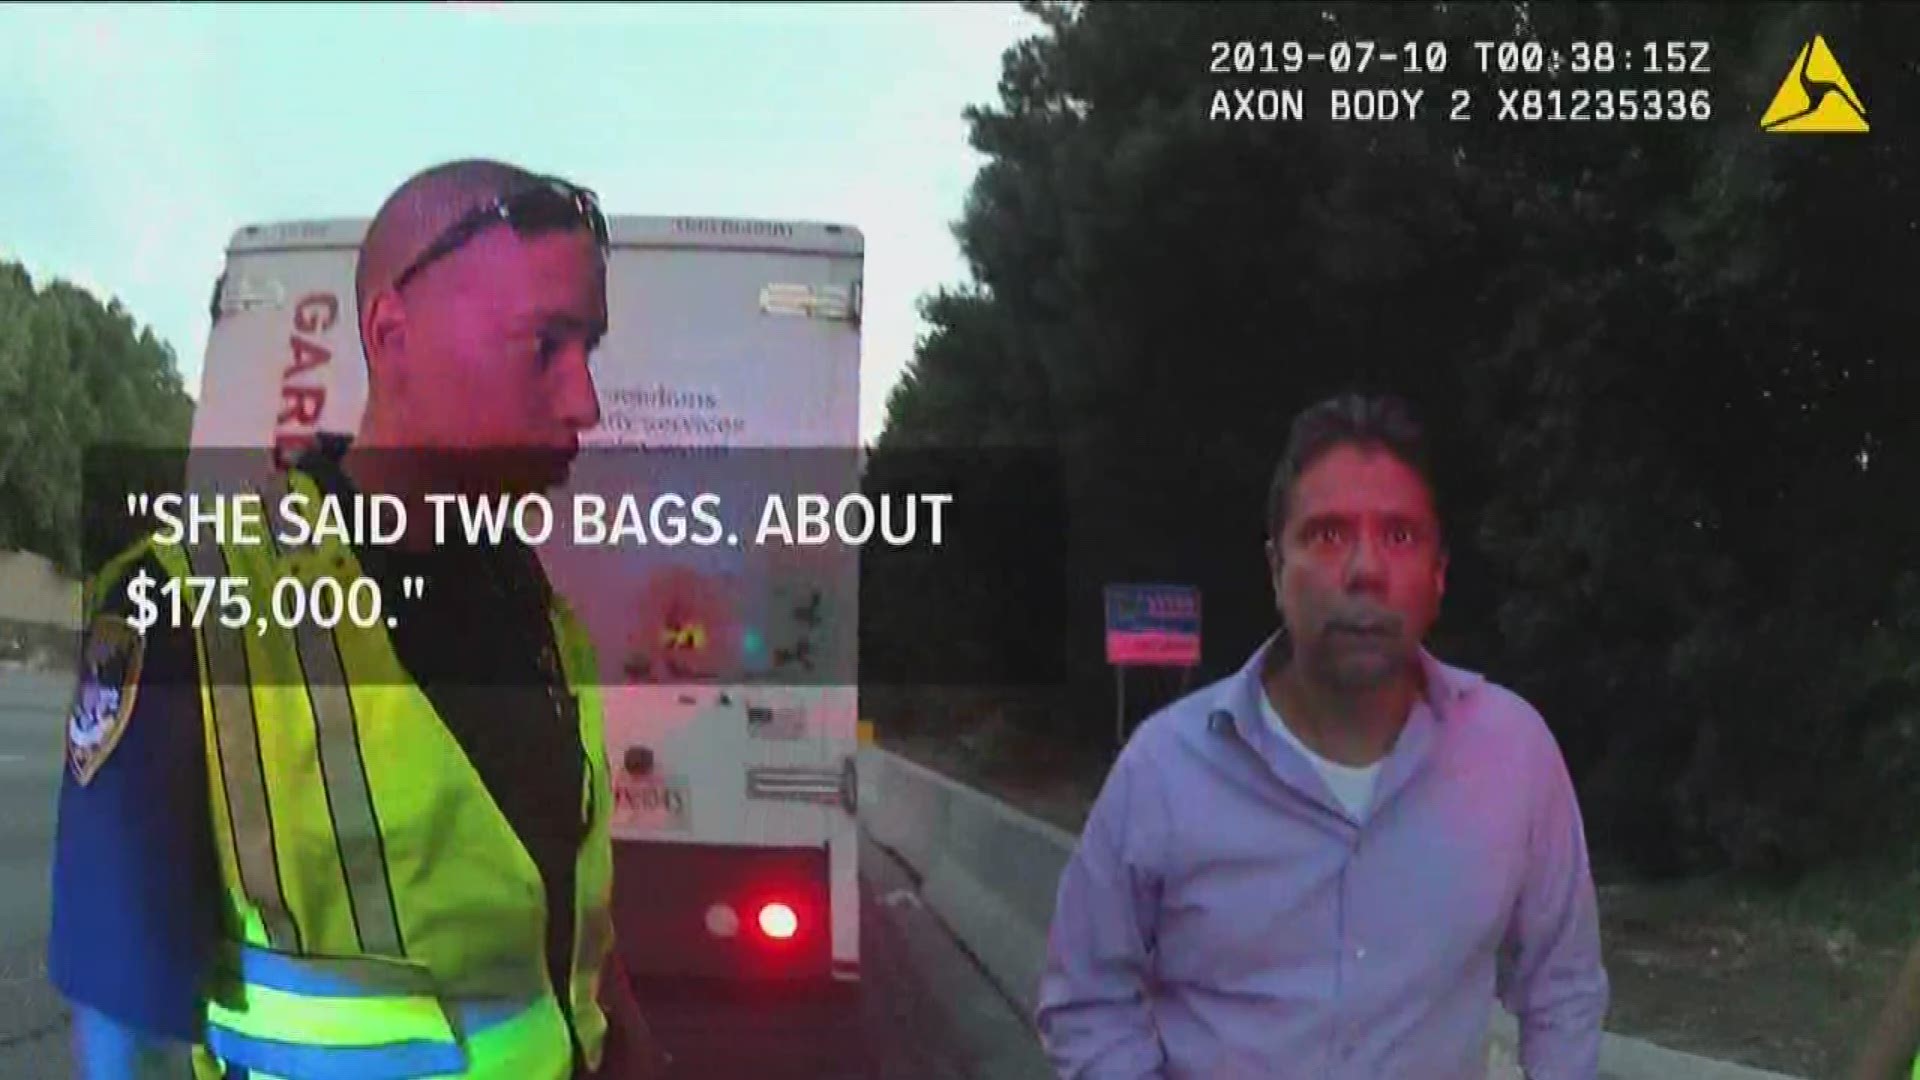 After viewing dashcam video from Dunwoody police, officers are seen explaining the situation to the general manager of the company, offering some clues as to how $175,000 spilled on I-285.